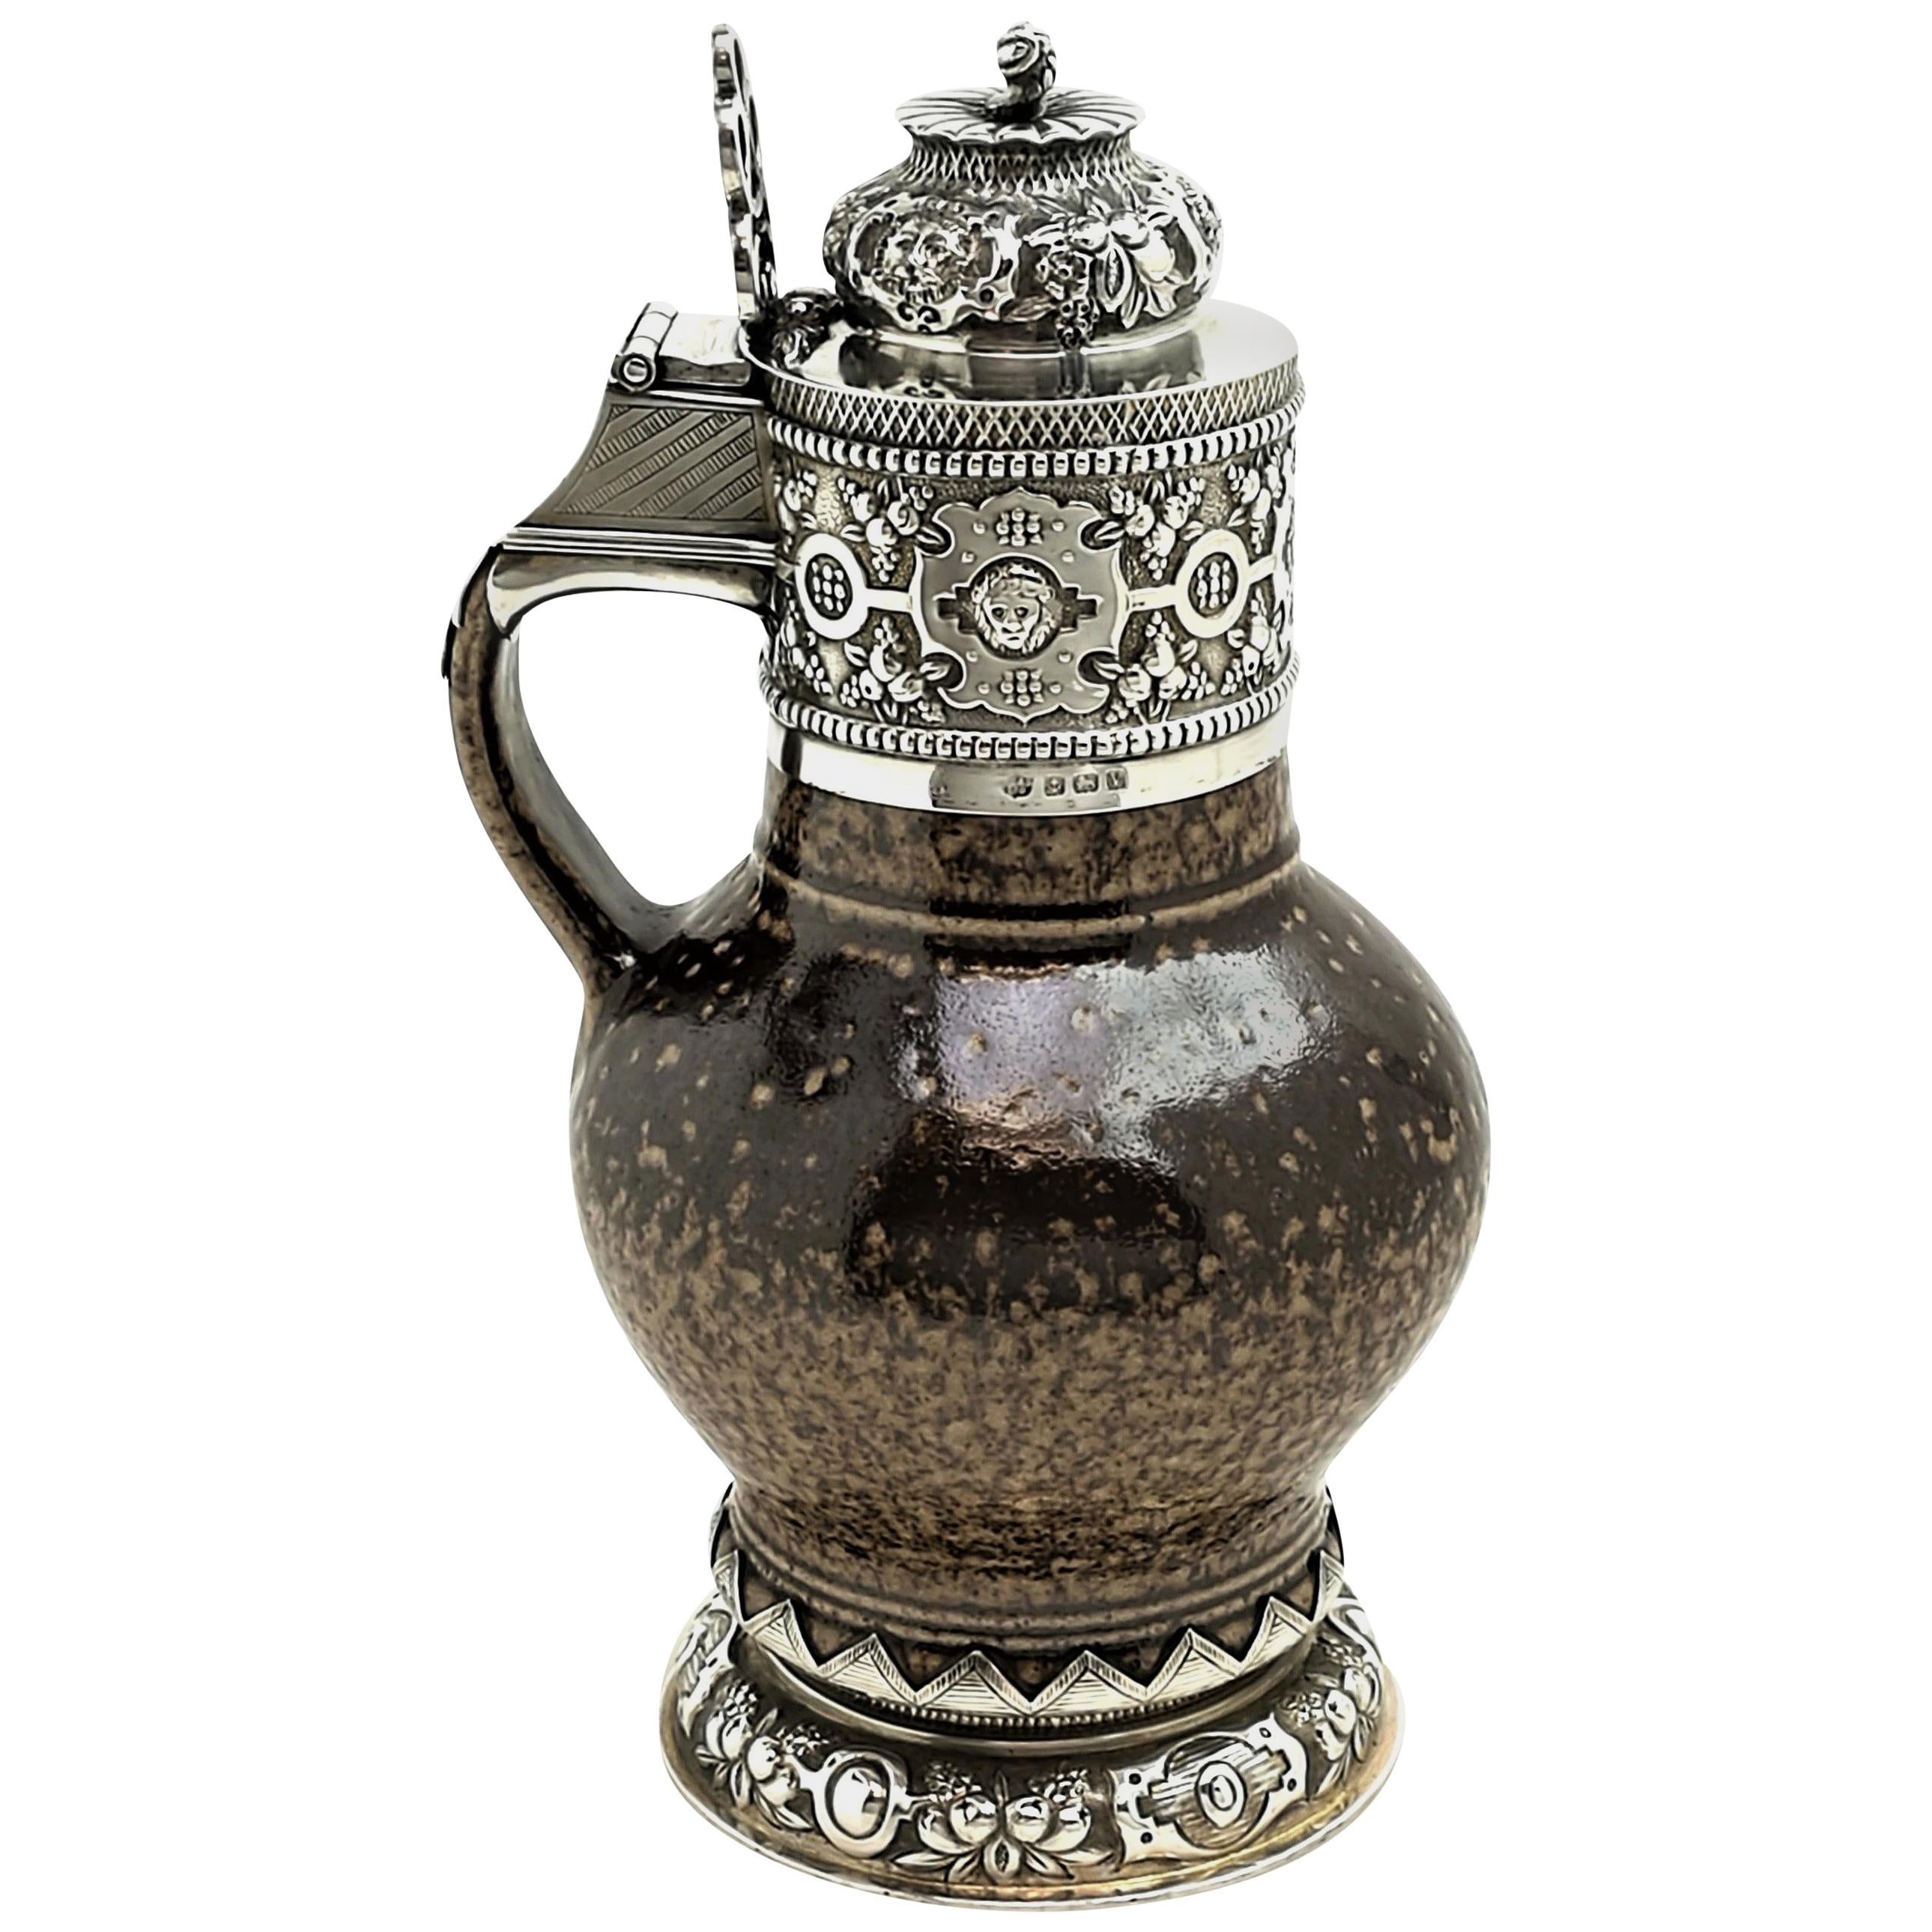 Sterling Silver Mounted Tigerware Jug 1920 Elizabethan, 16th-17th Century Style